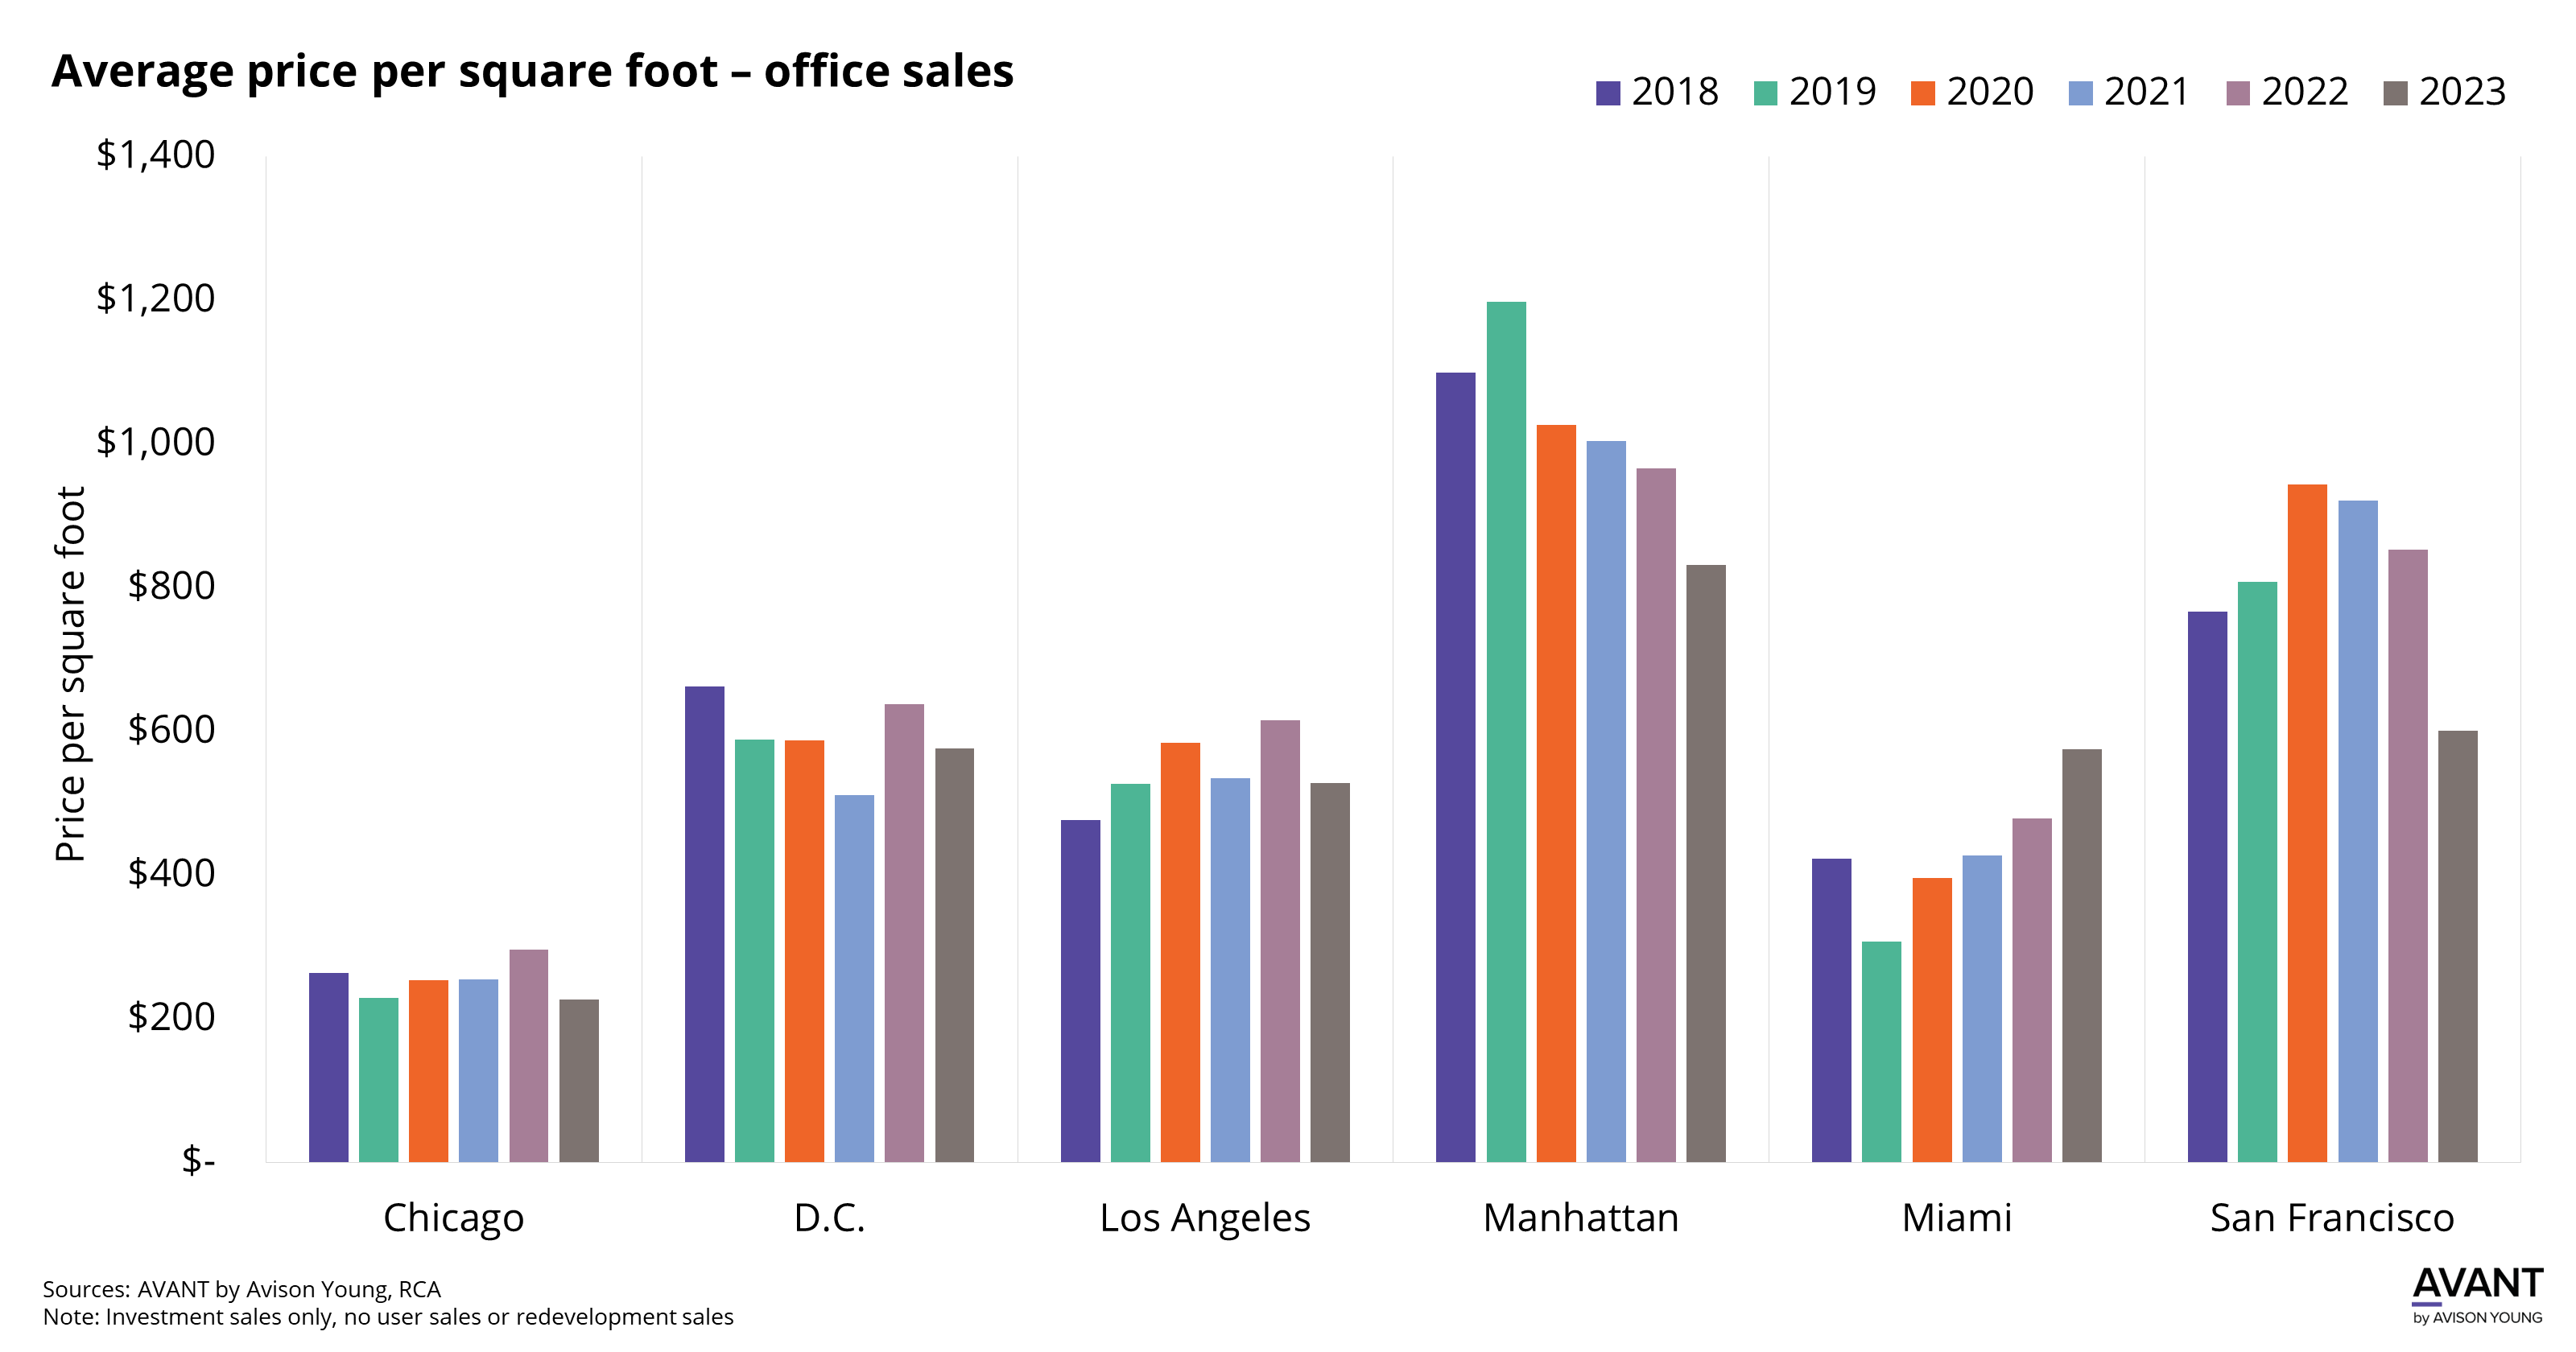 graph of average price per square foot in office sales in major U.S. cities from 2018 to 2023